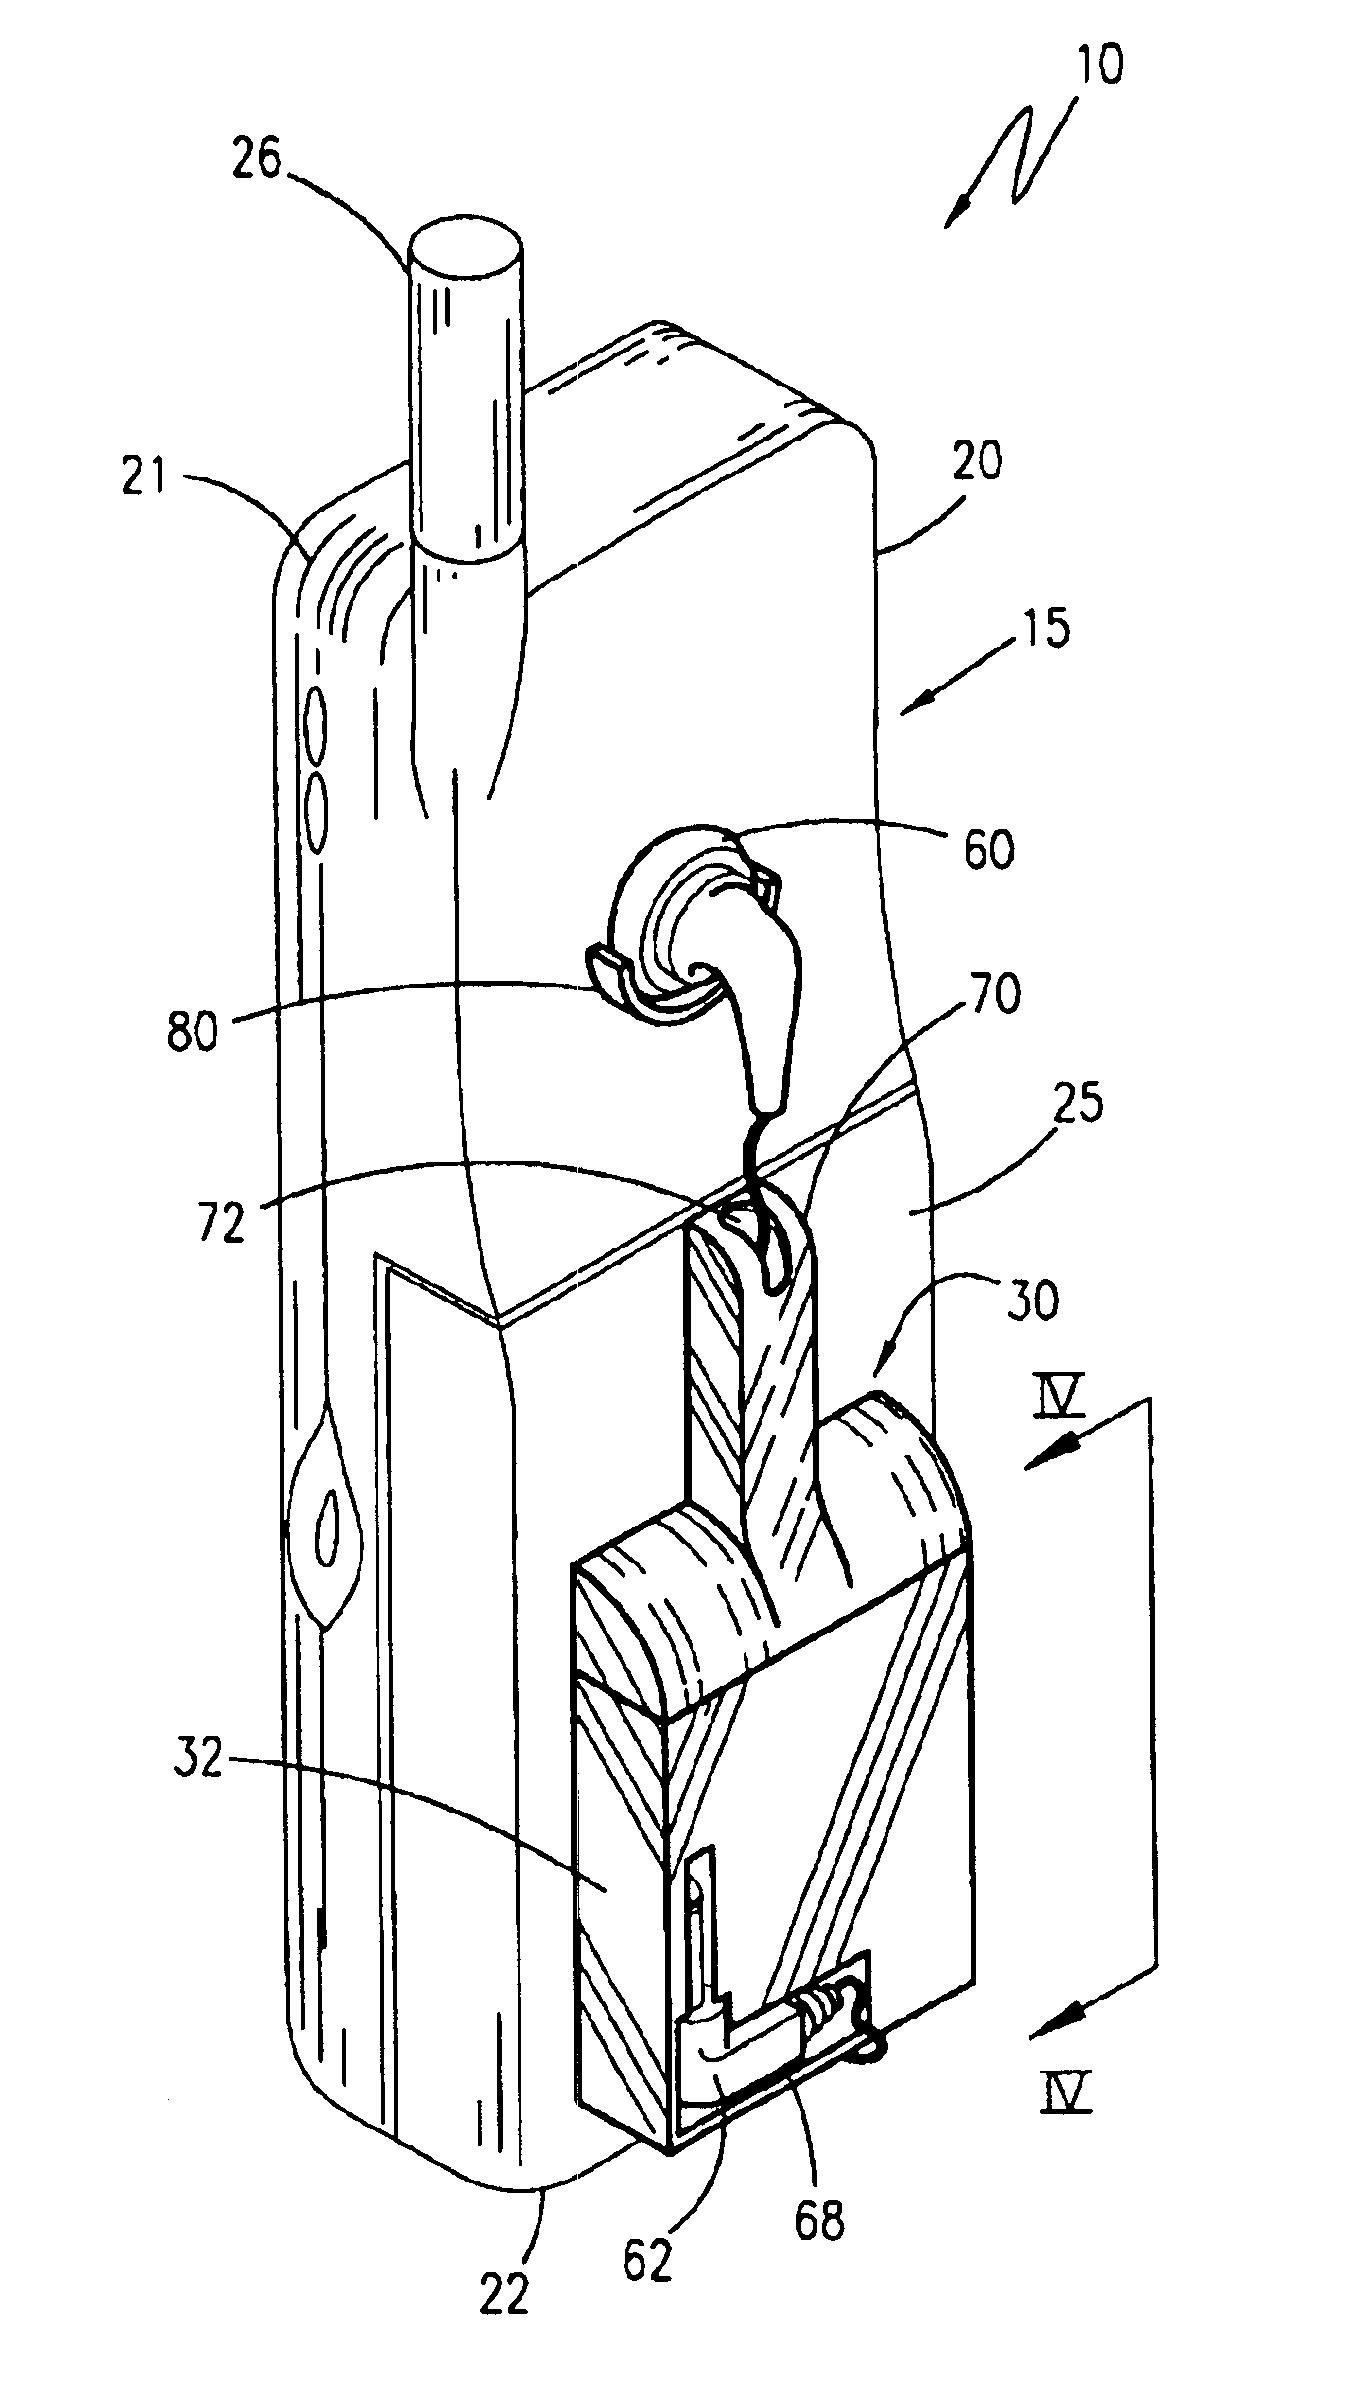 Cellular communication device with integral headset retraction assembly